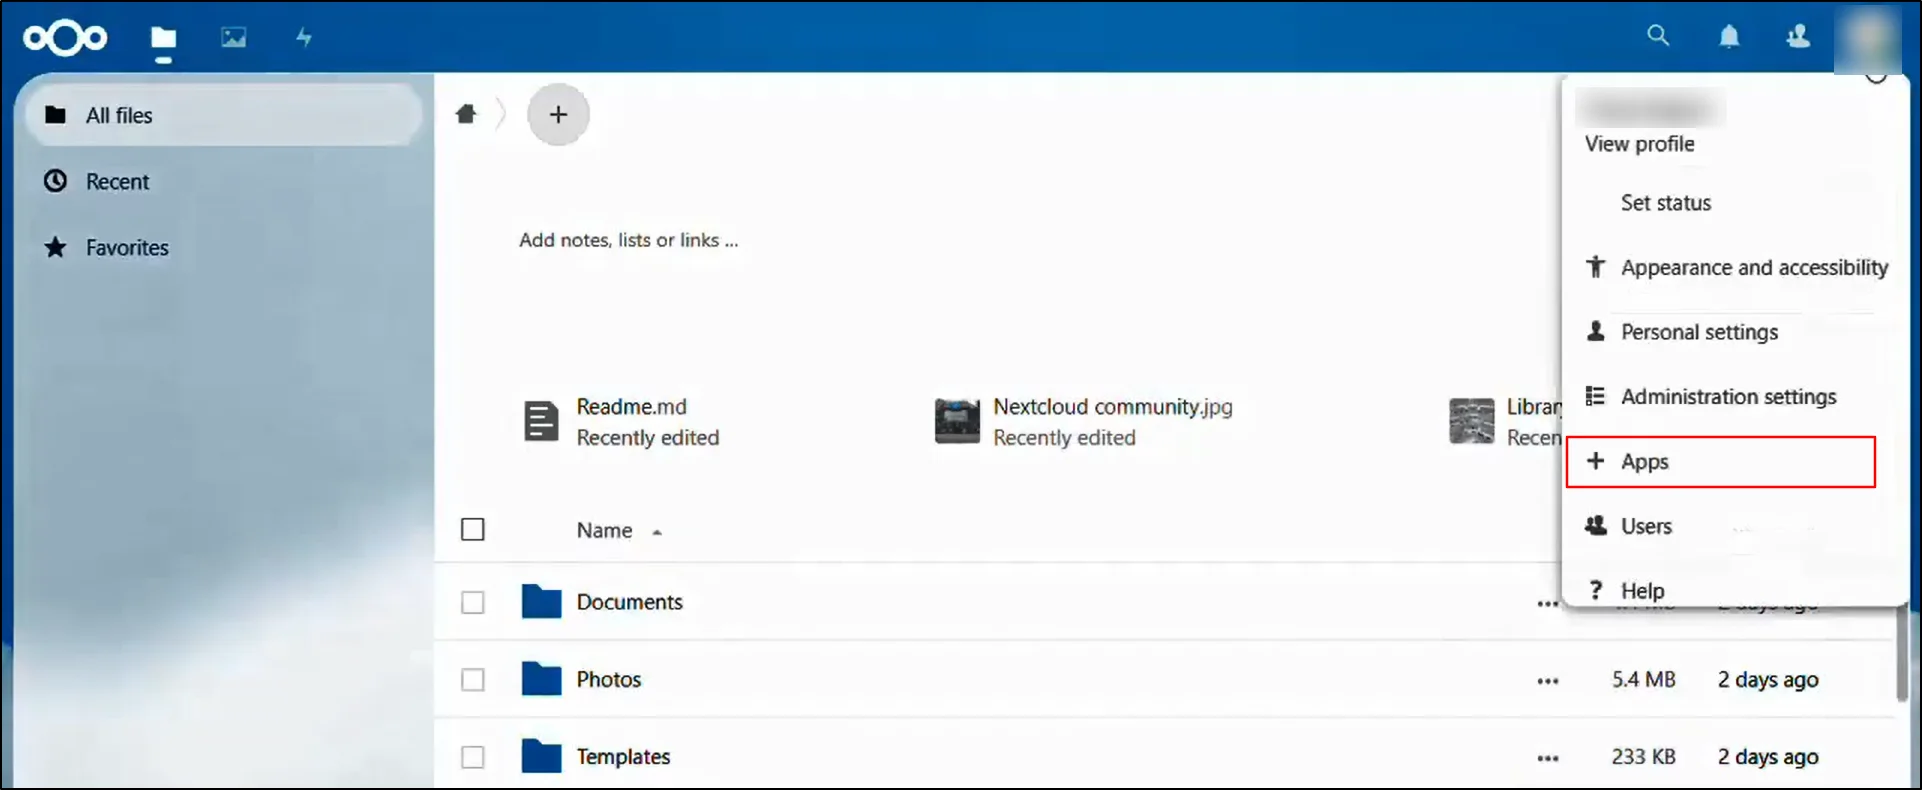 Nextcloud-SAML-Single-Sign-On-Navigate-to-profile-and-click-on-Apps